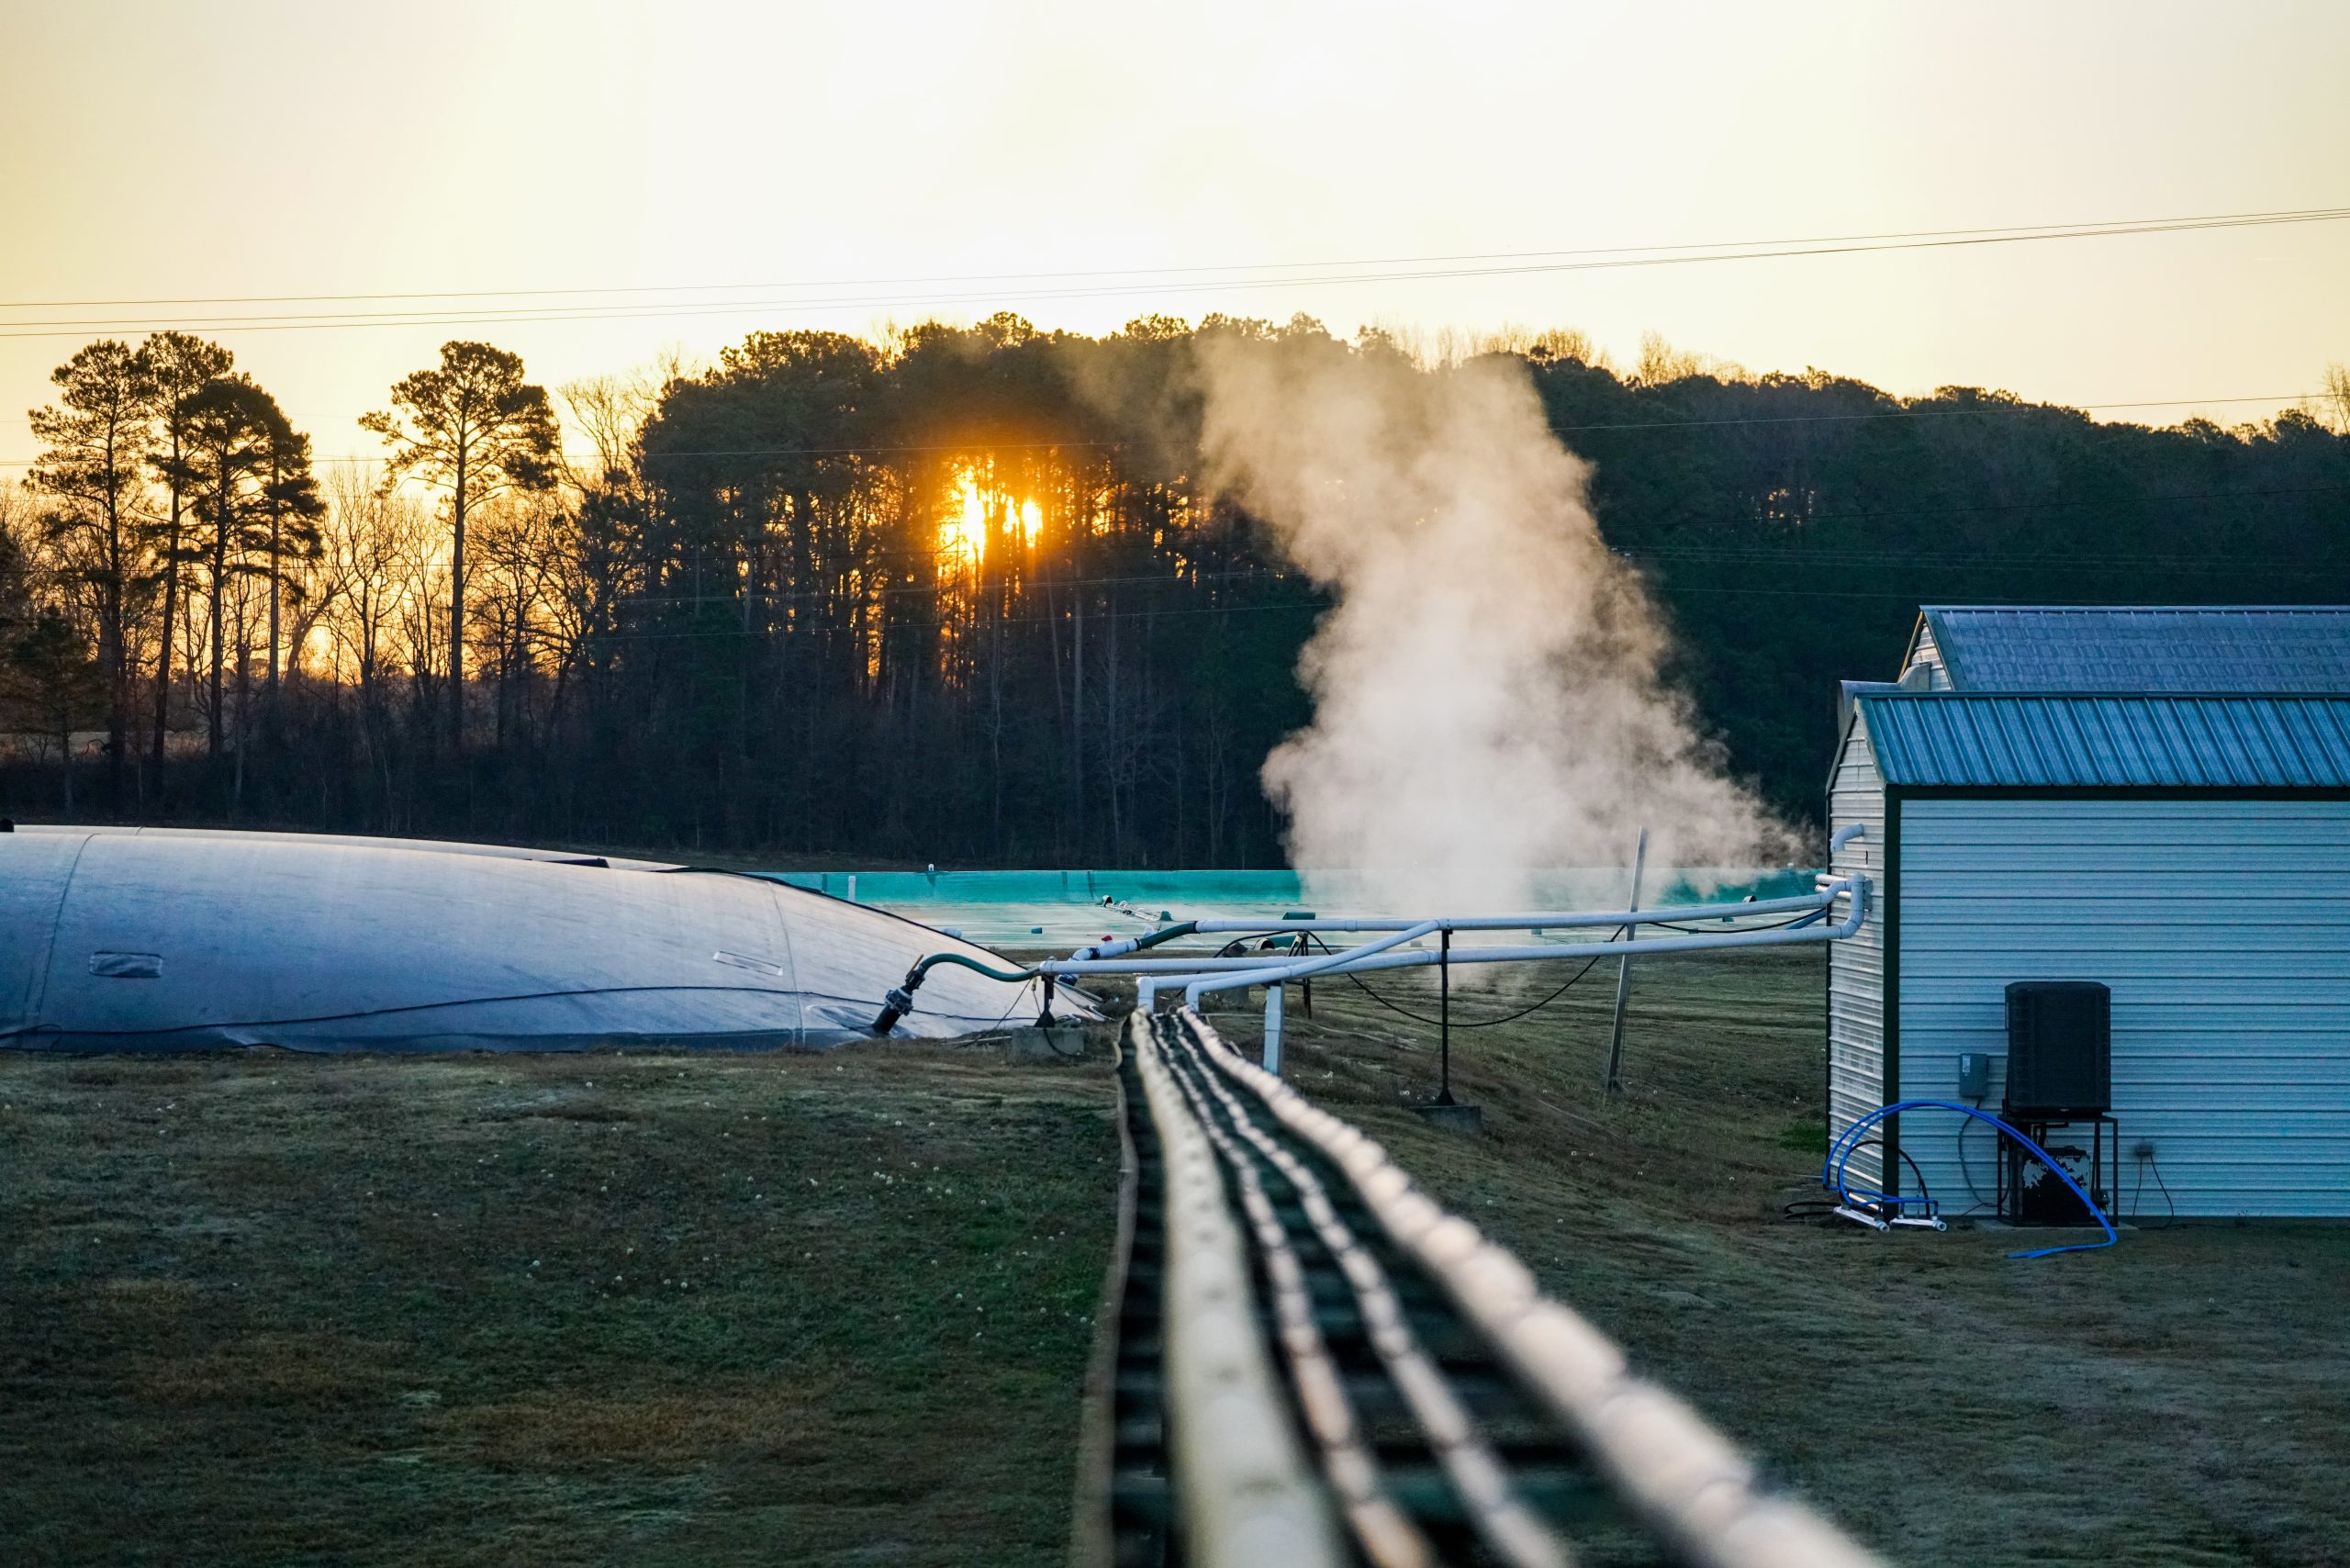 A hazy photo of pipes and other structures on grass in front of tall trees with a yellow sunrise in the background. Steam rises in the center